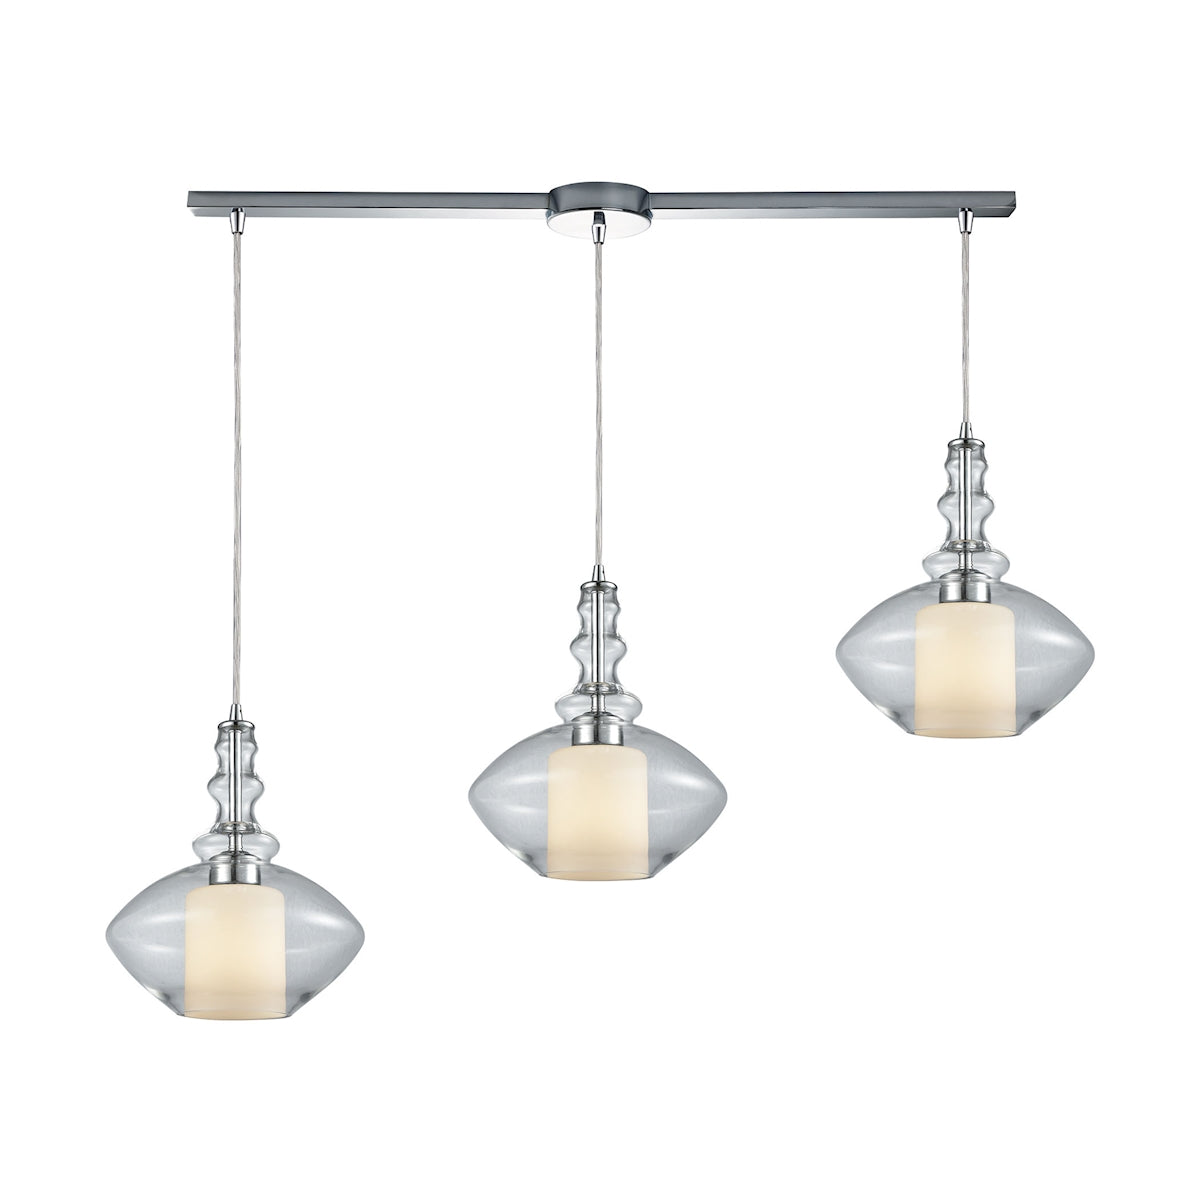 ELK Lighting 56500/3L Alora 3-Light Linear Mini Pendant Fixture in Chrome with Clear and Opal White Glass